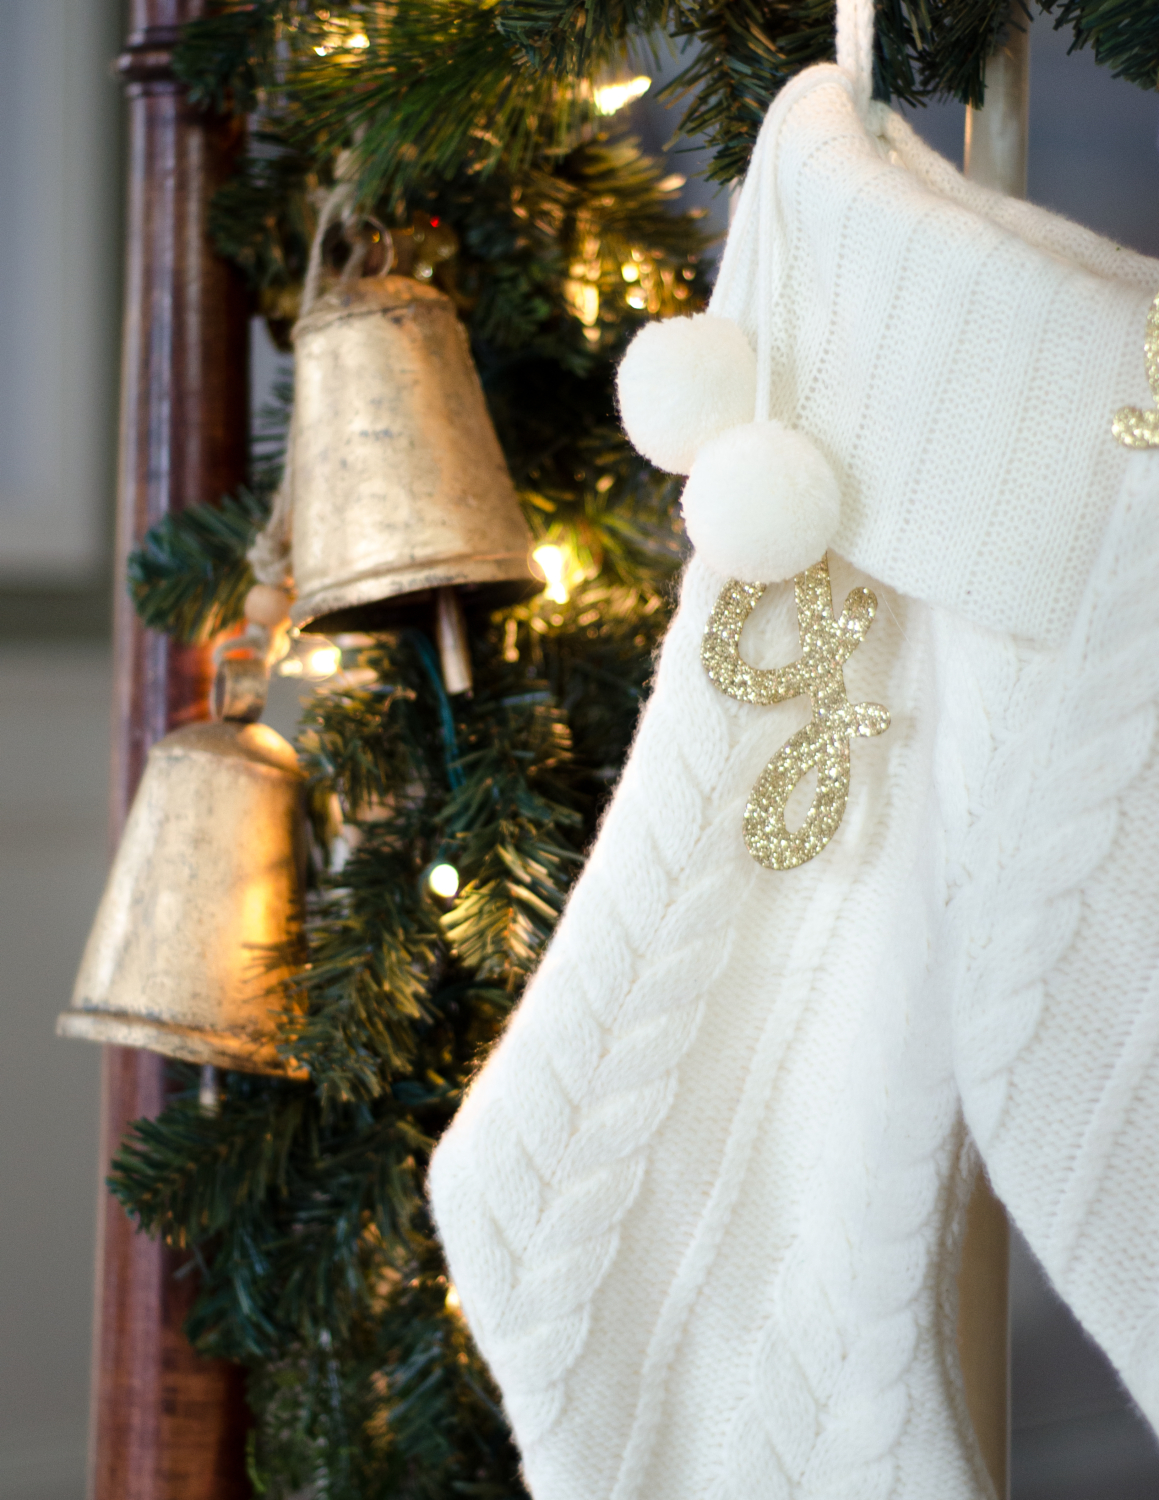 Classic Christmas entryway with greenery, twinkle lights, cable knit stockings, and more! So much inspiration!!